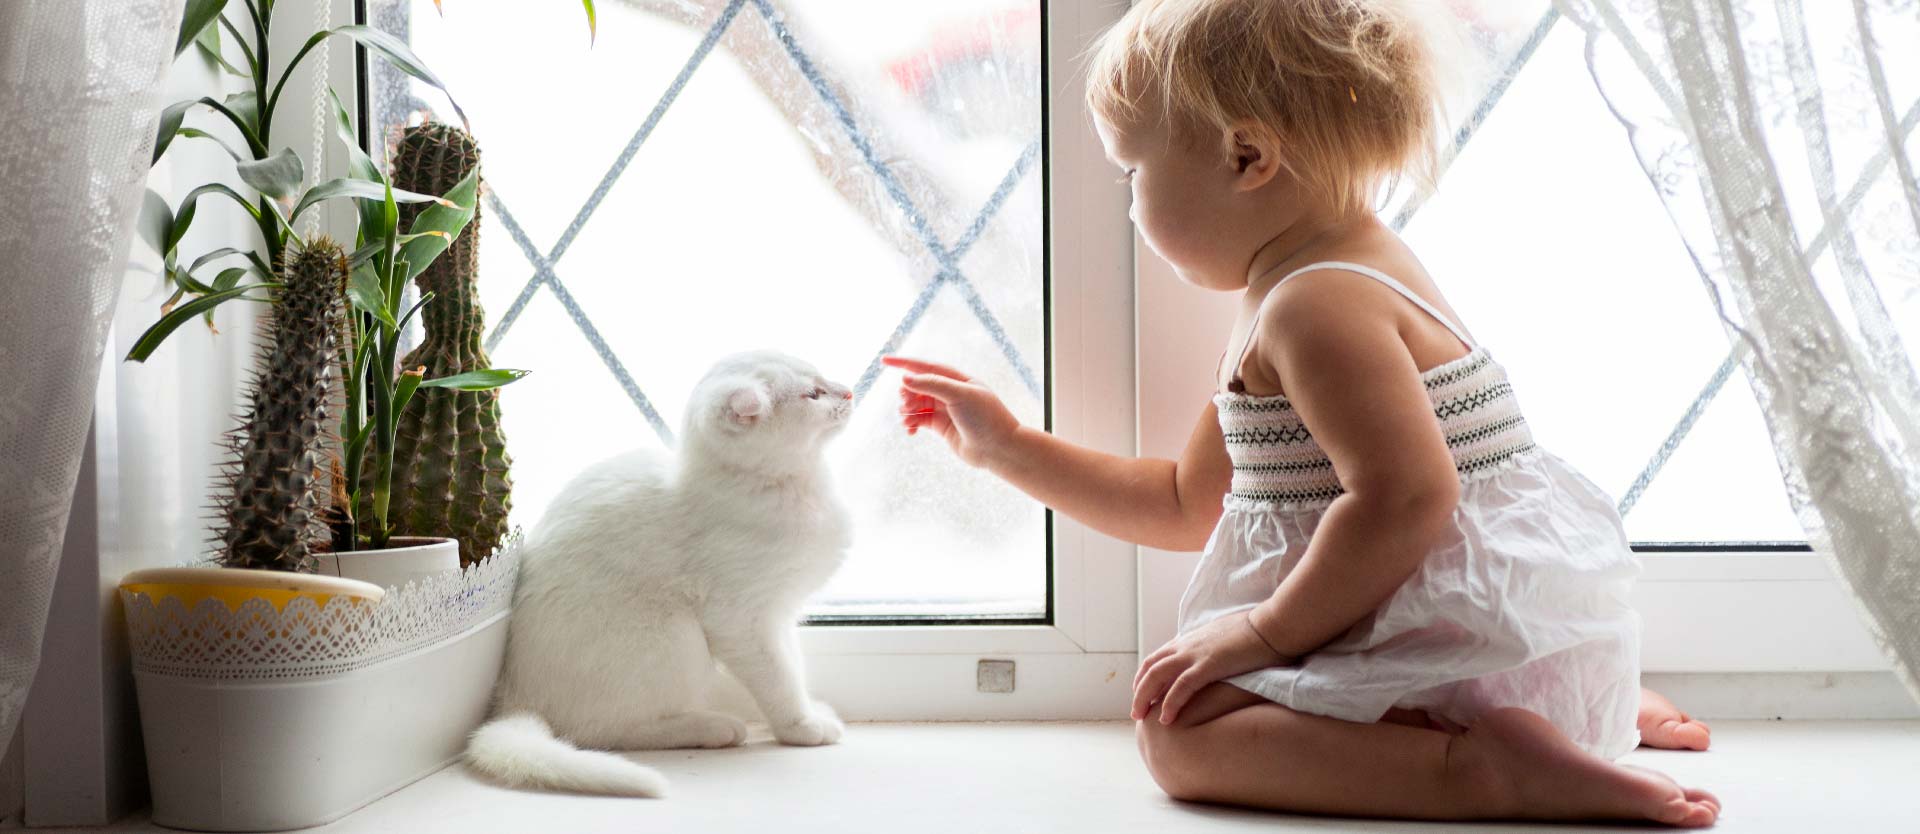 Baby playing with a cat on a window ledge